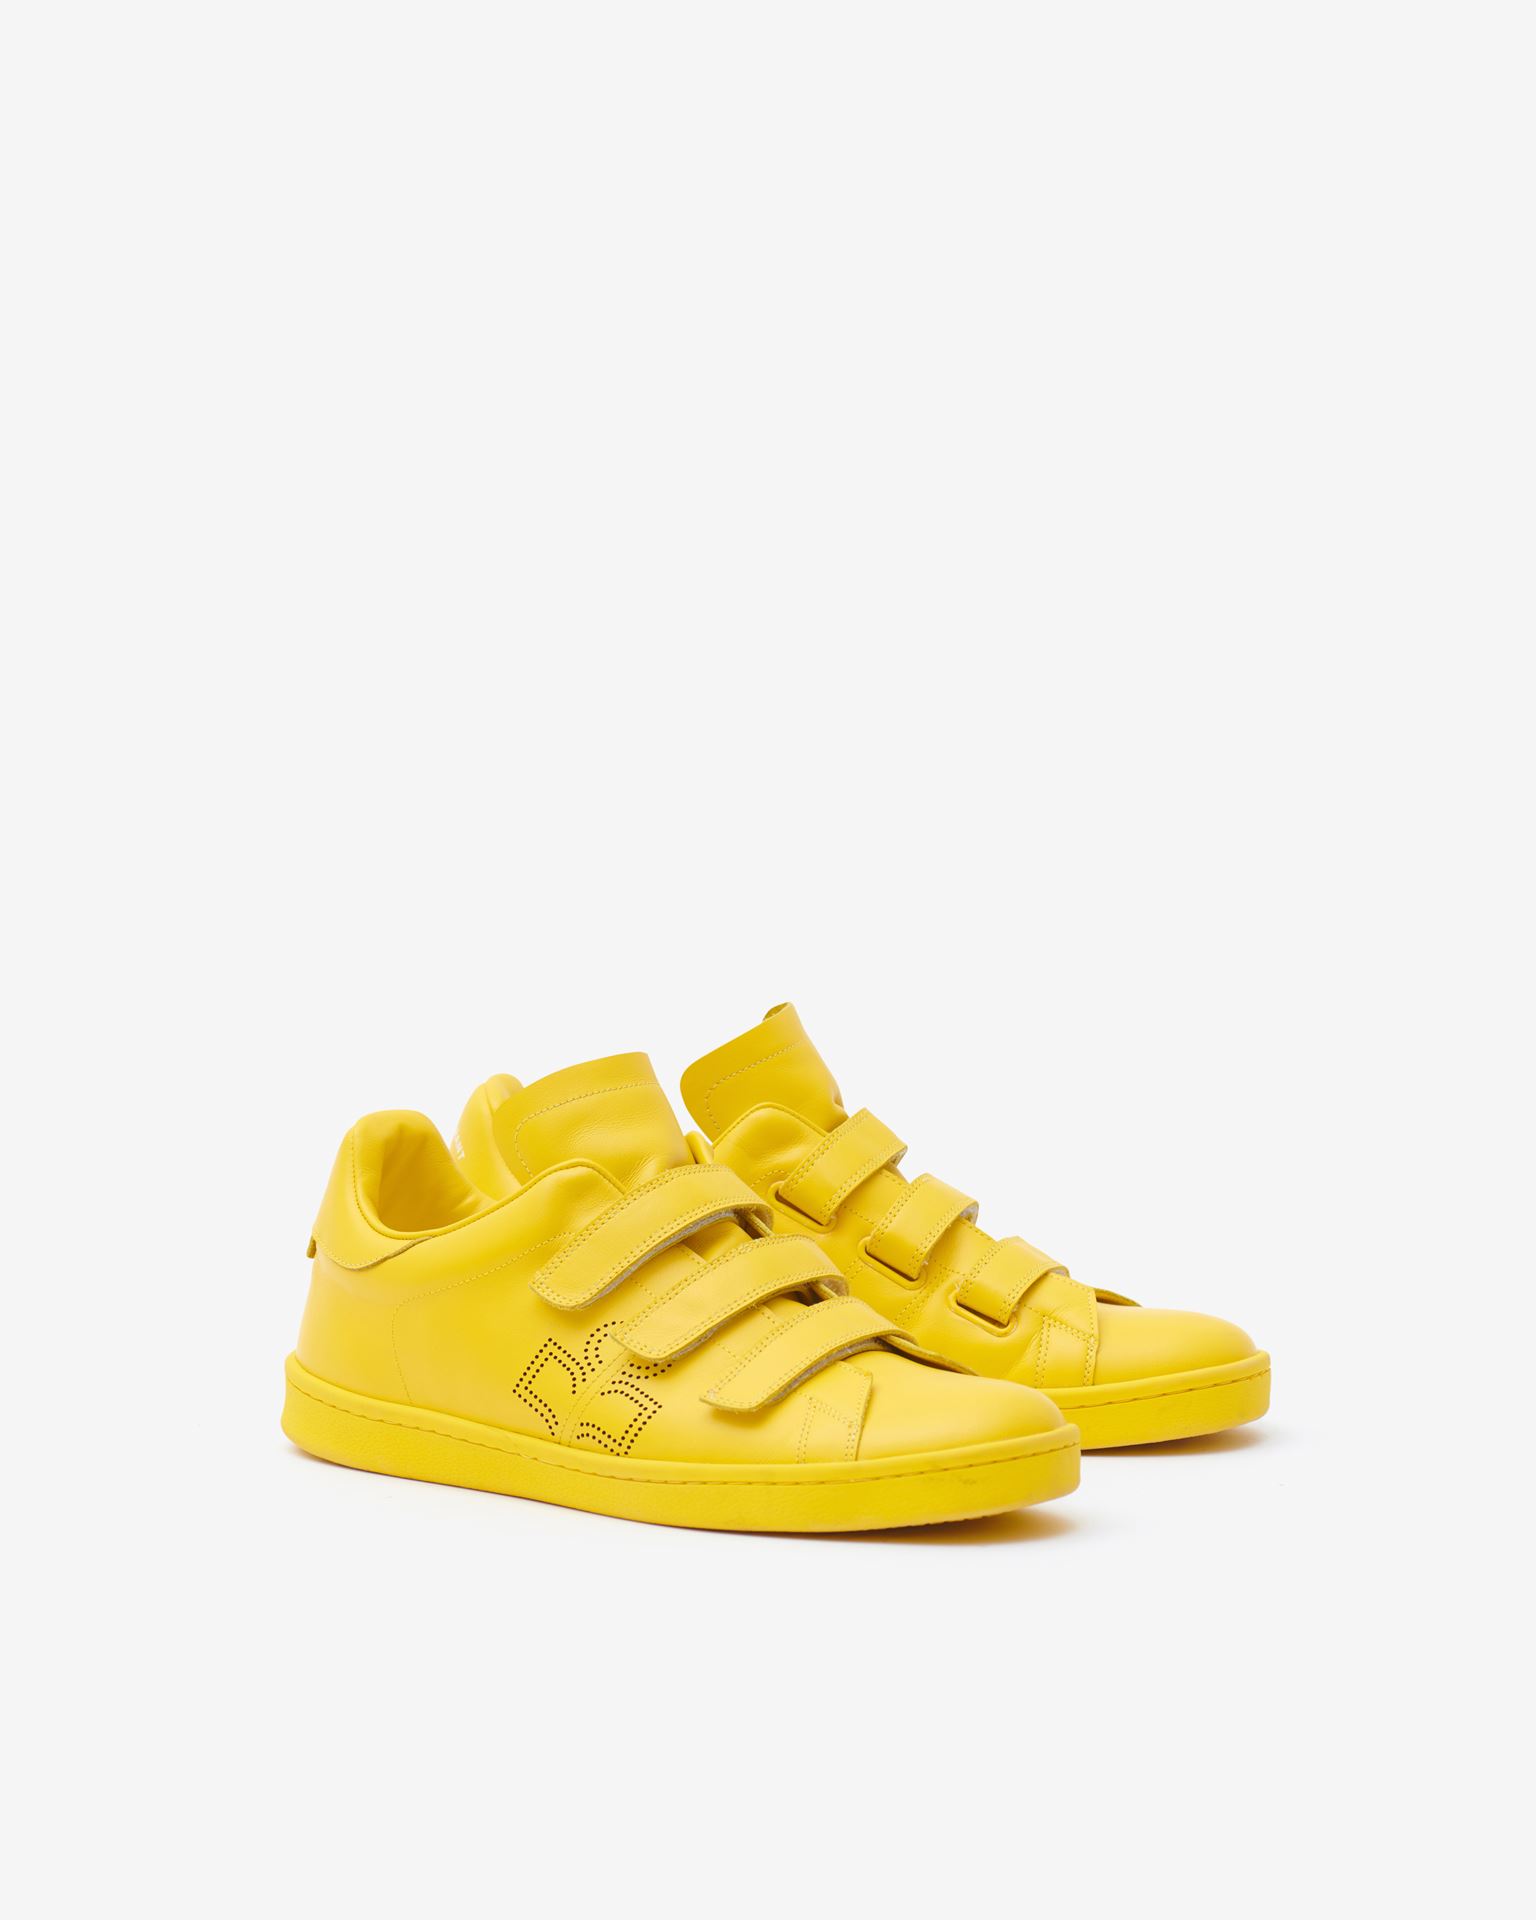 Isabel Marant, Barty Leather Sneakers - Women - Yellow